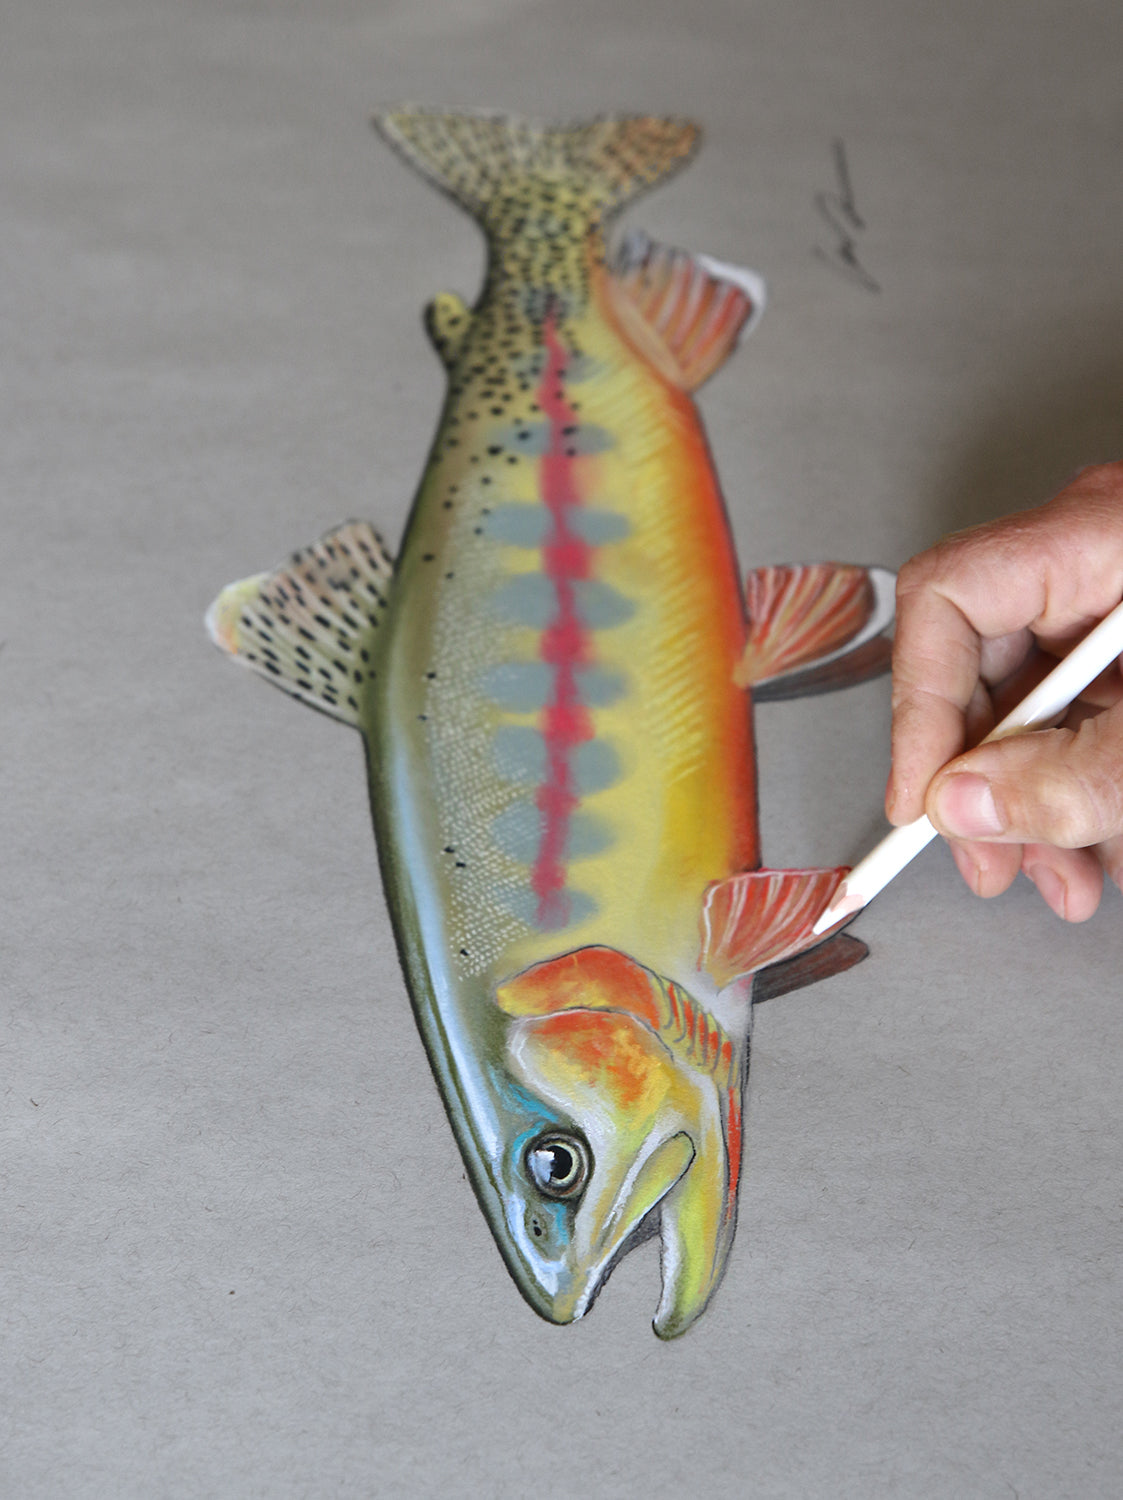 A pastel drawing of a Golden Trout on toned gray paper.